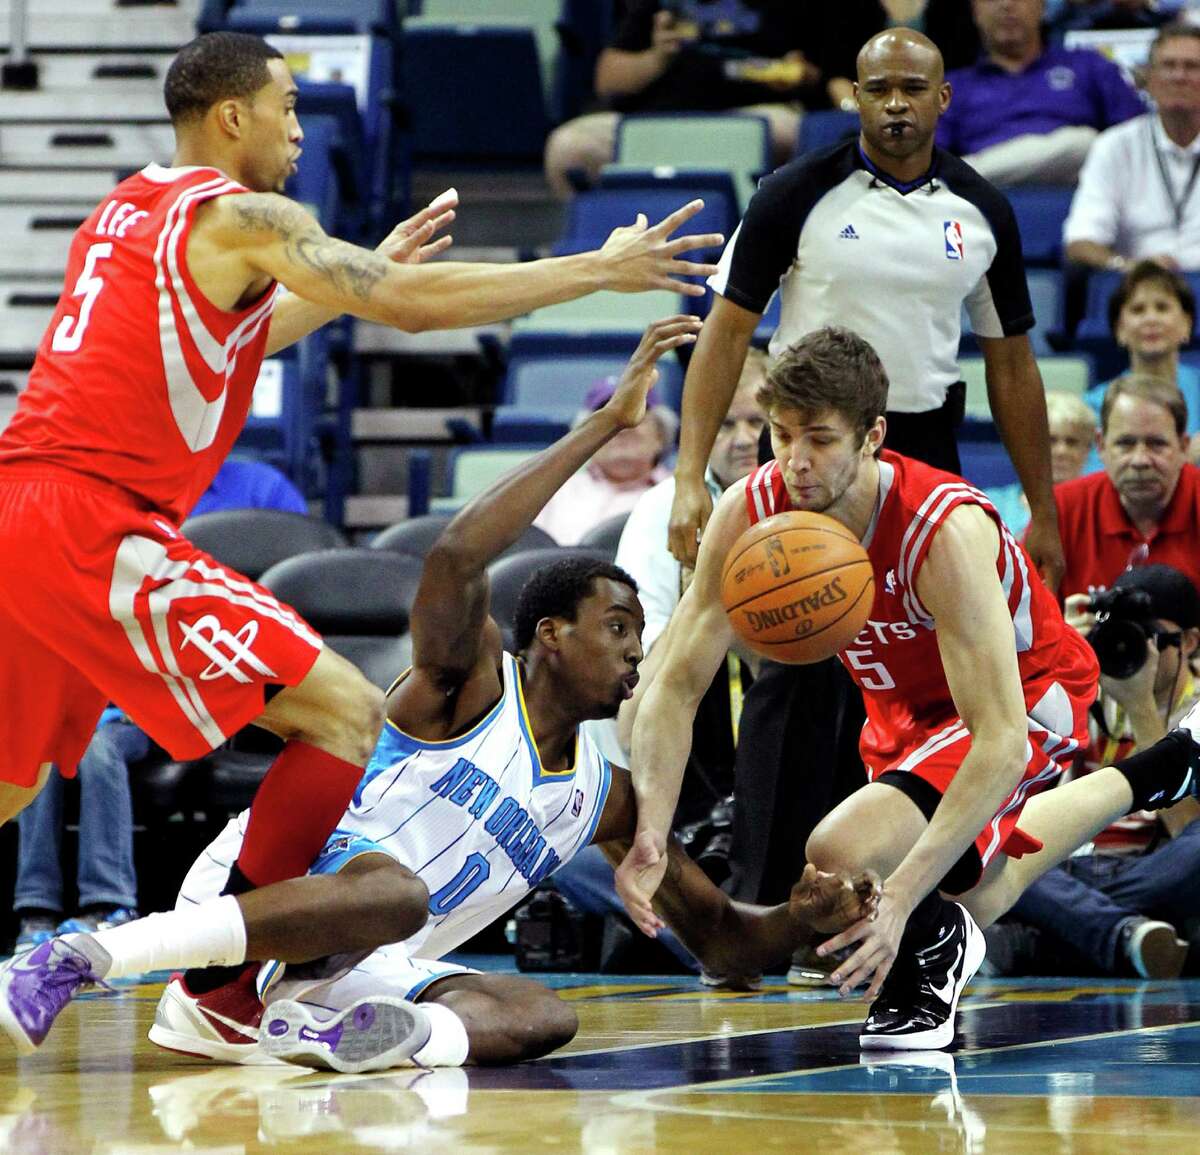 New Orleans Hornets small forward Al-Farouq Aminu (0) battles for a loose ball with Houston Rockets shooting guard Courtney Lee (5) and forward Chandler Parsons, right, in the first half of an NBA basketball game in New Orleans, Thursday, April 19, 2012. (AP Photo/Gerald Herbert)